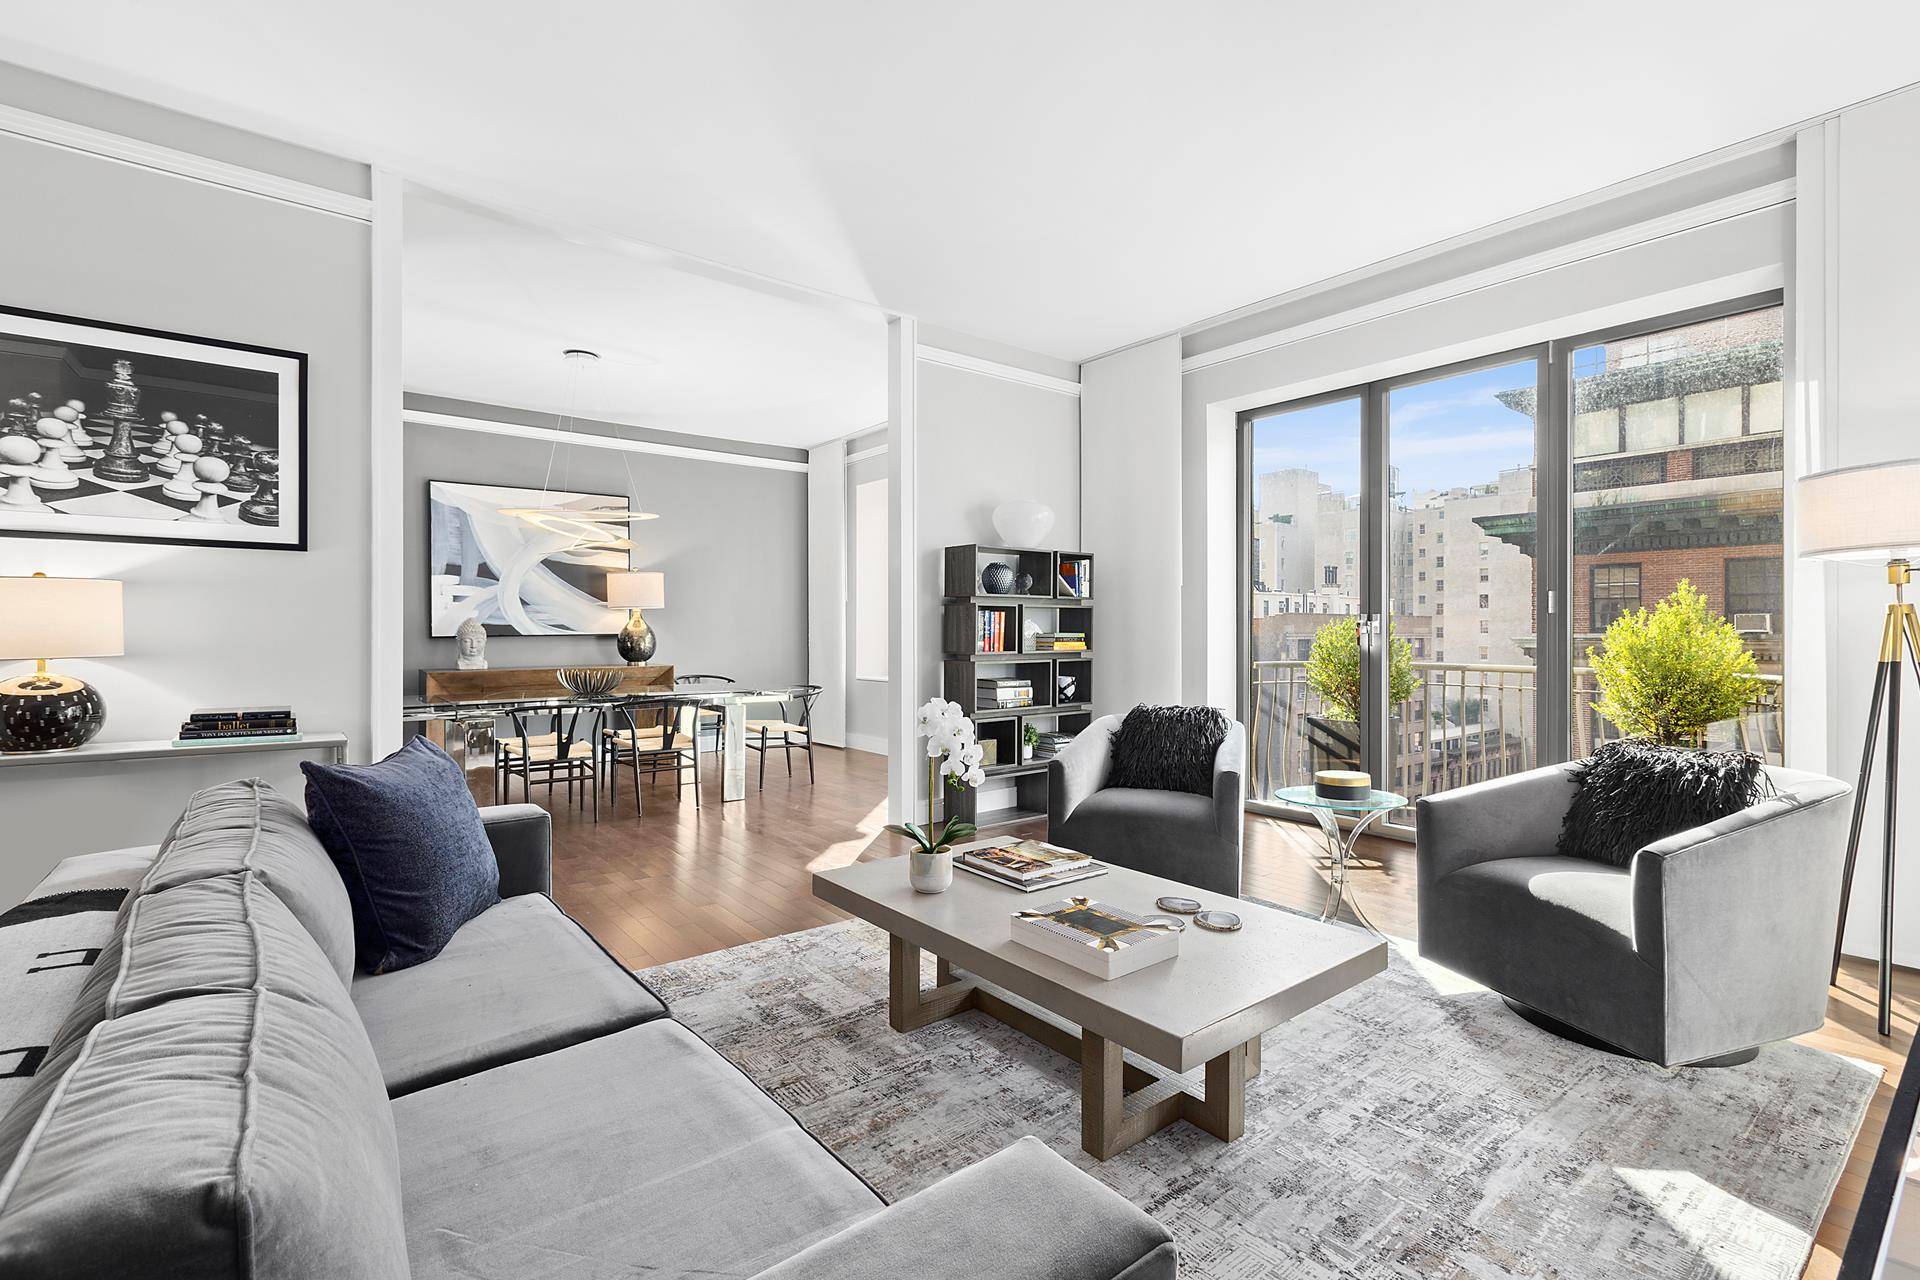 Grand proportions are on display in this mint condition luxury four bedroom condominium with twenty four hour doorman perfectly located in the heart of the Upper East Side.